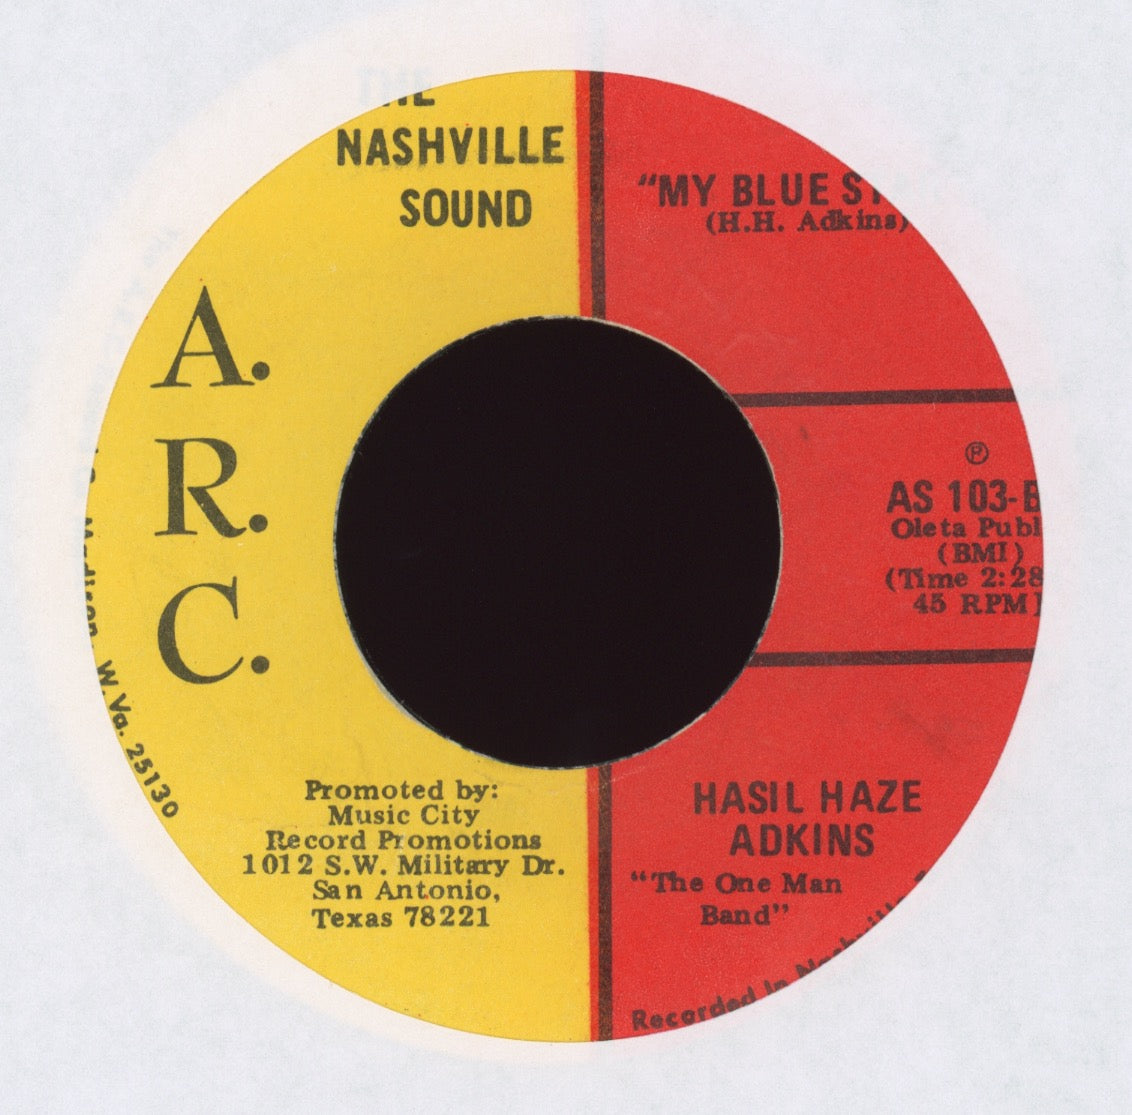 Hasil Adkins - Heartaches Over You on A.R.C.